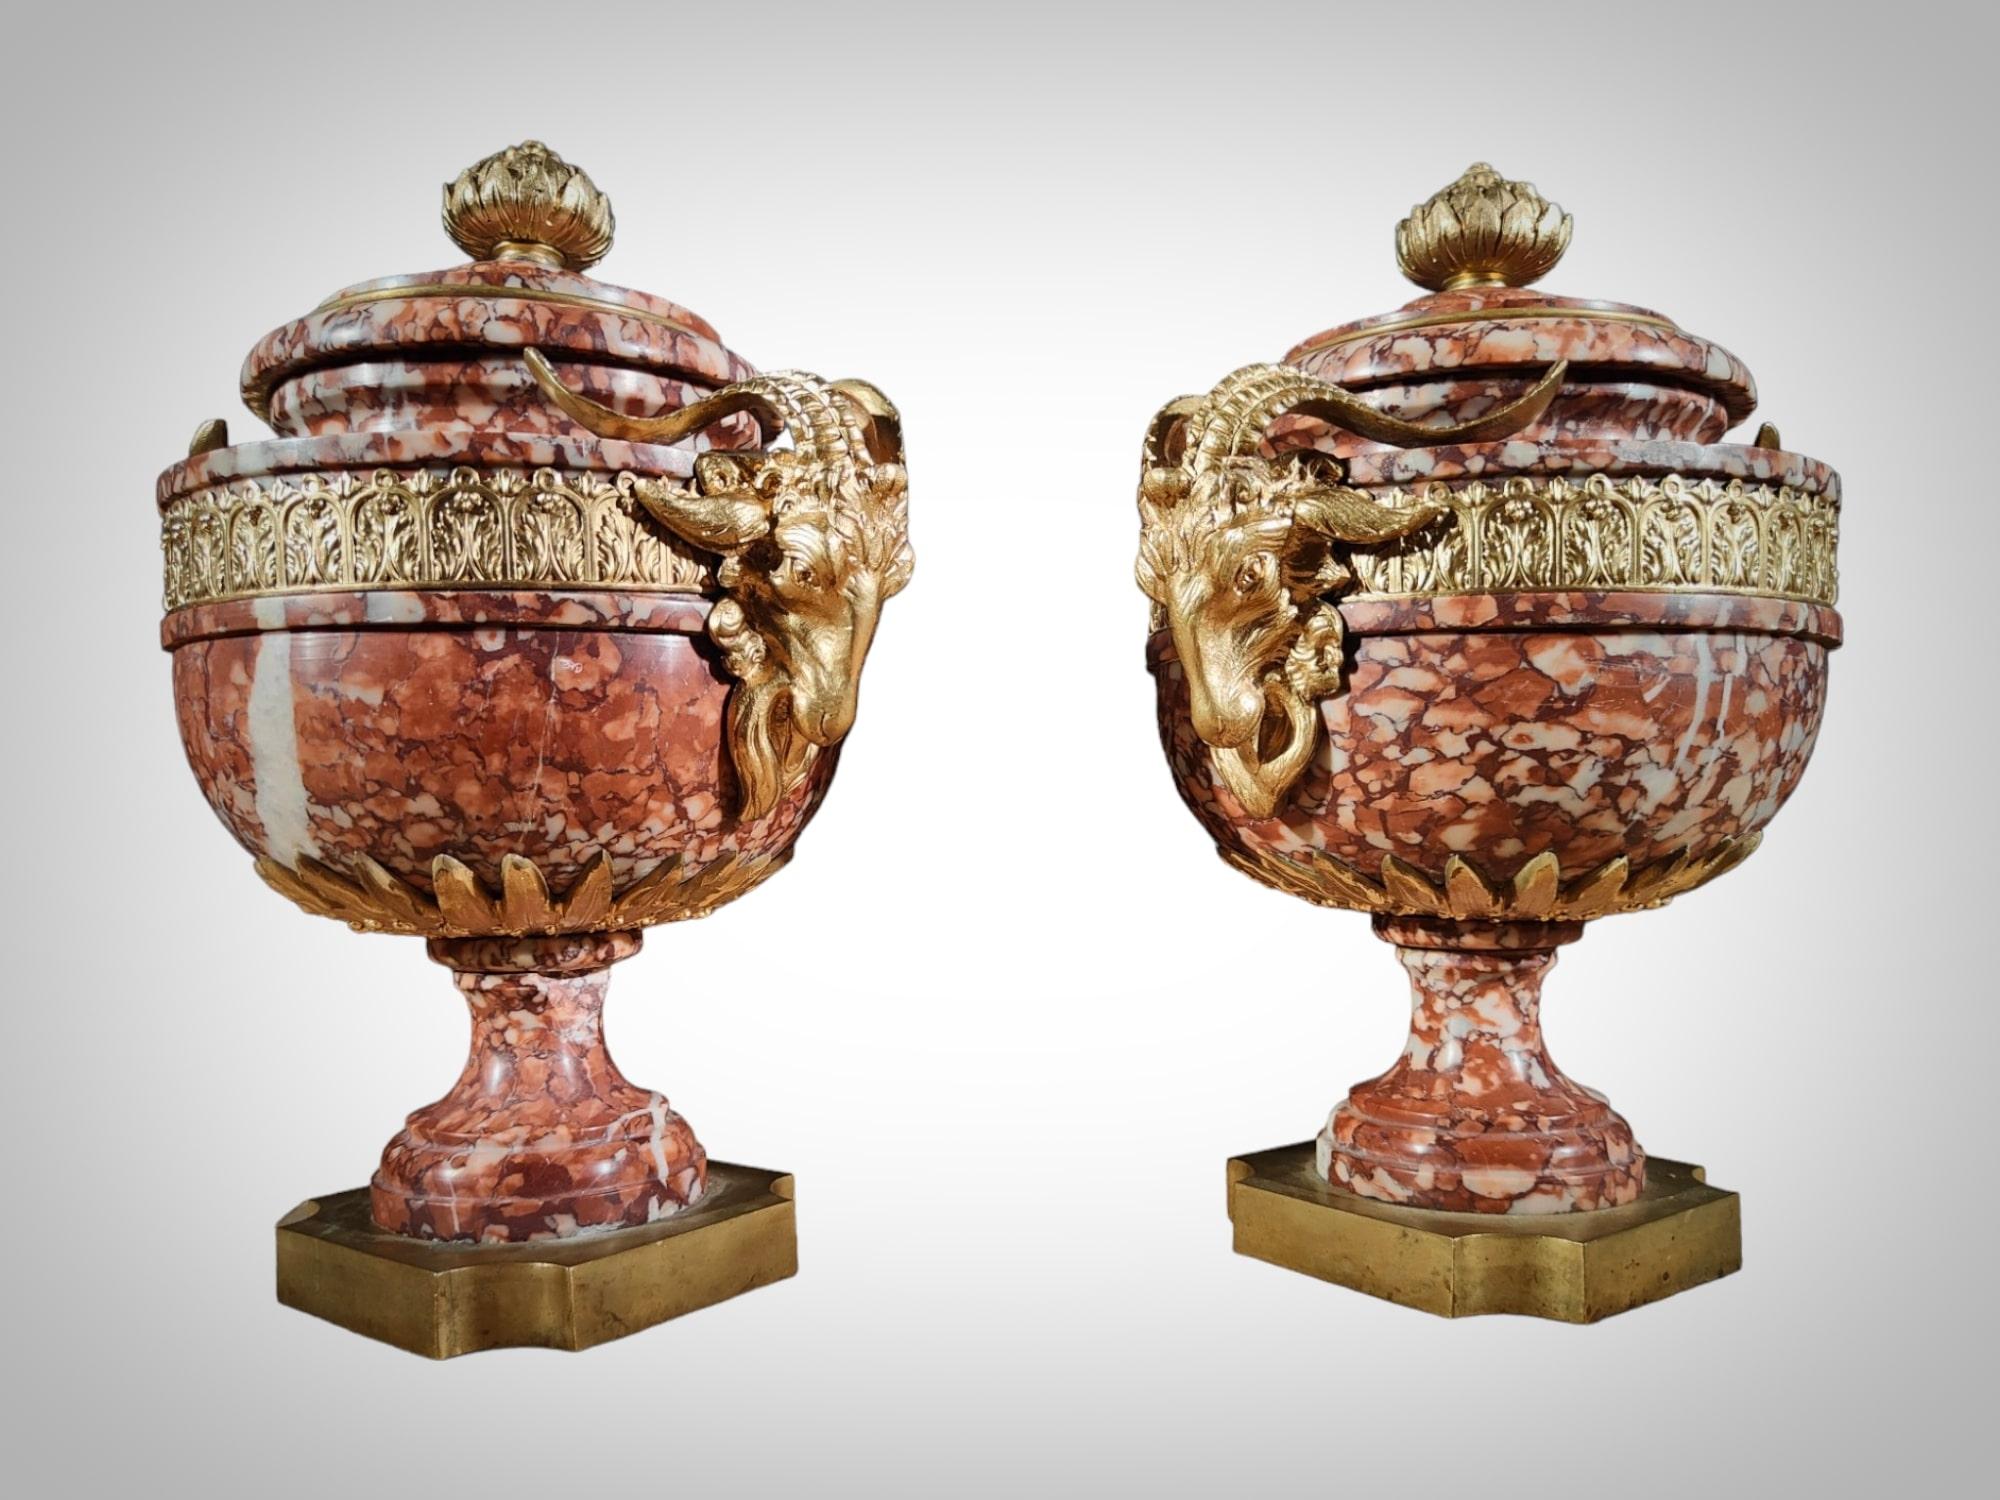 Immerse yourself in the opulence of the 19th century with these elegant marble goblets adorned with gilded bronze. The finely chiseled bronze adds a touch of sophistication to these pieces, reminiscent of the exquisite craftsmanship of the era. With